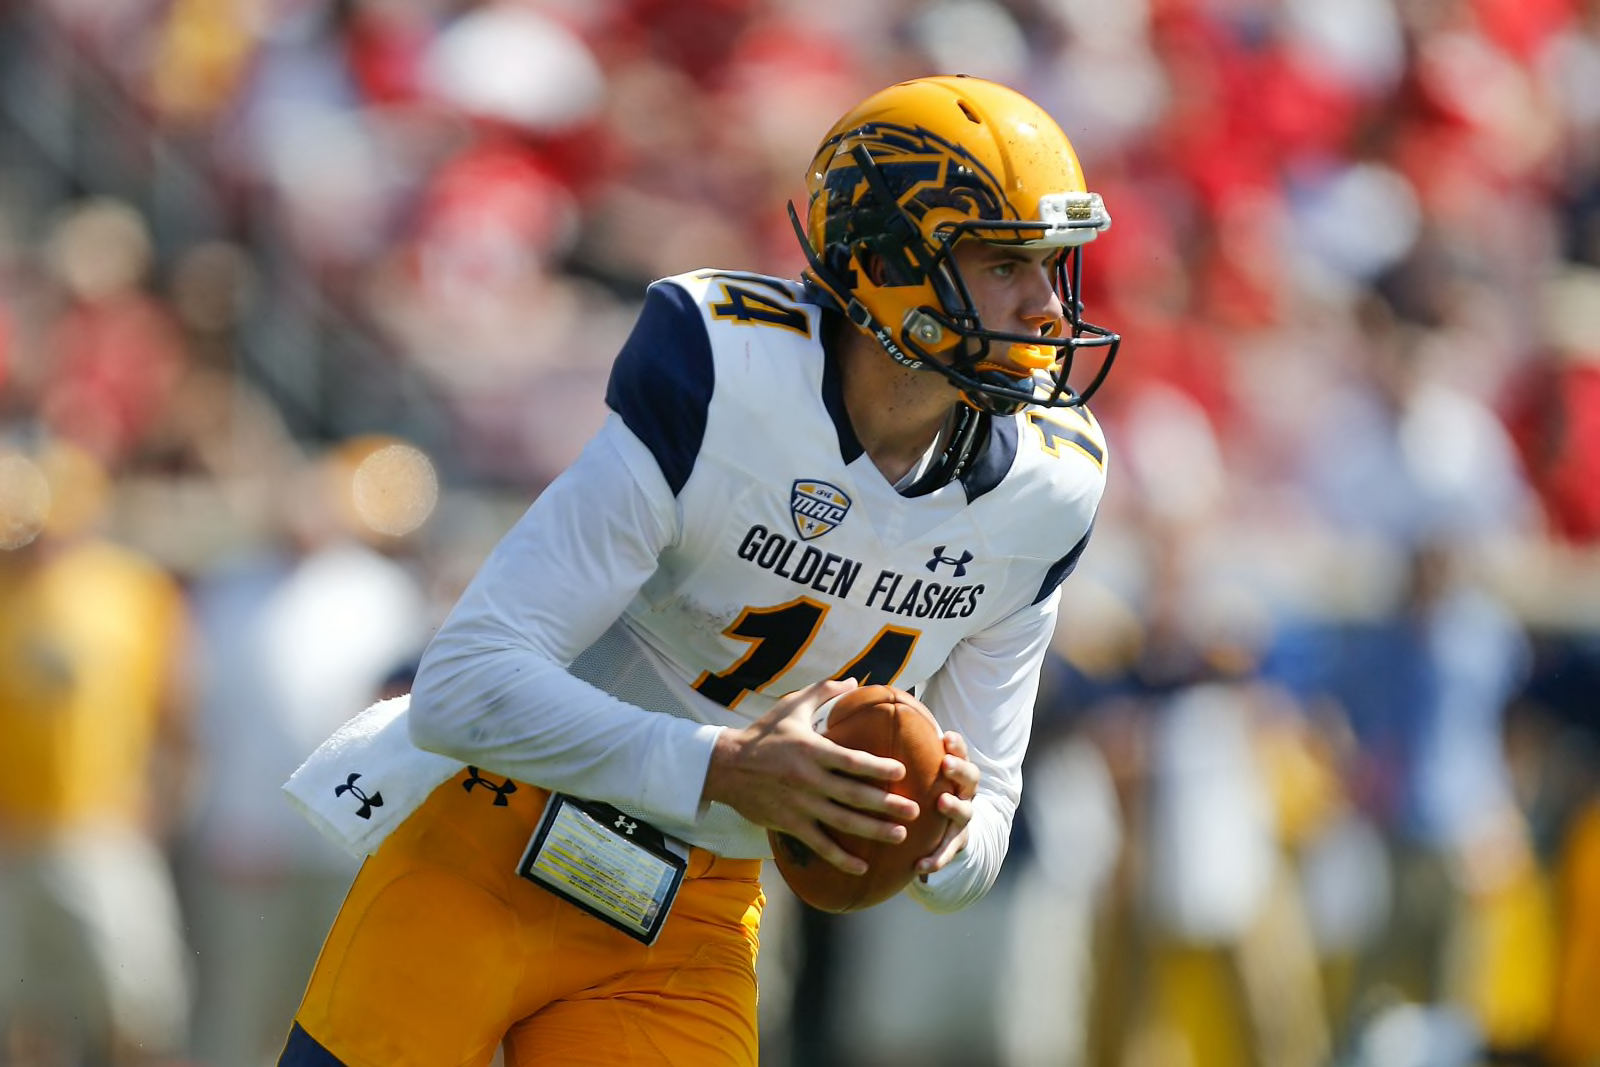 Kent State Football Golden Flashes look to make program history in